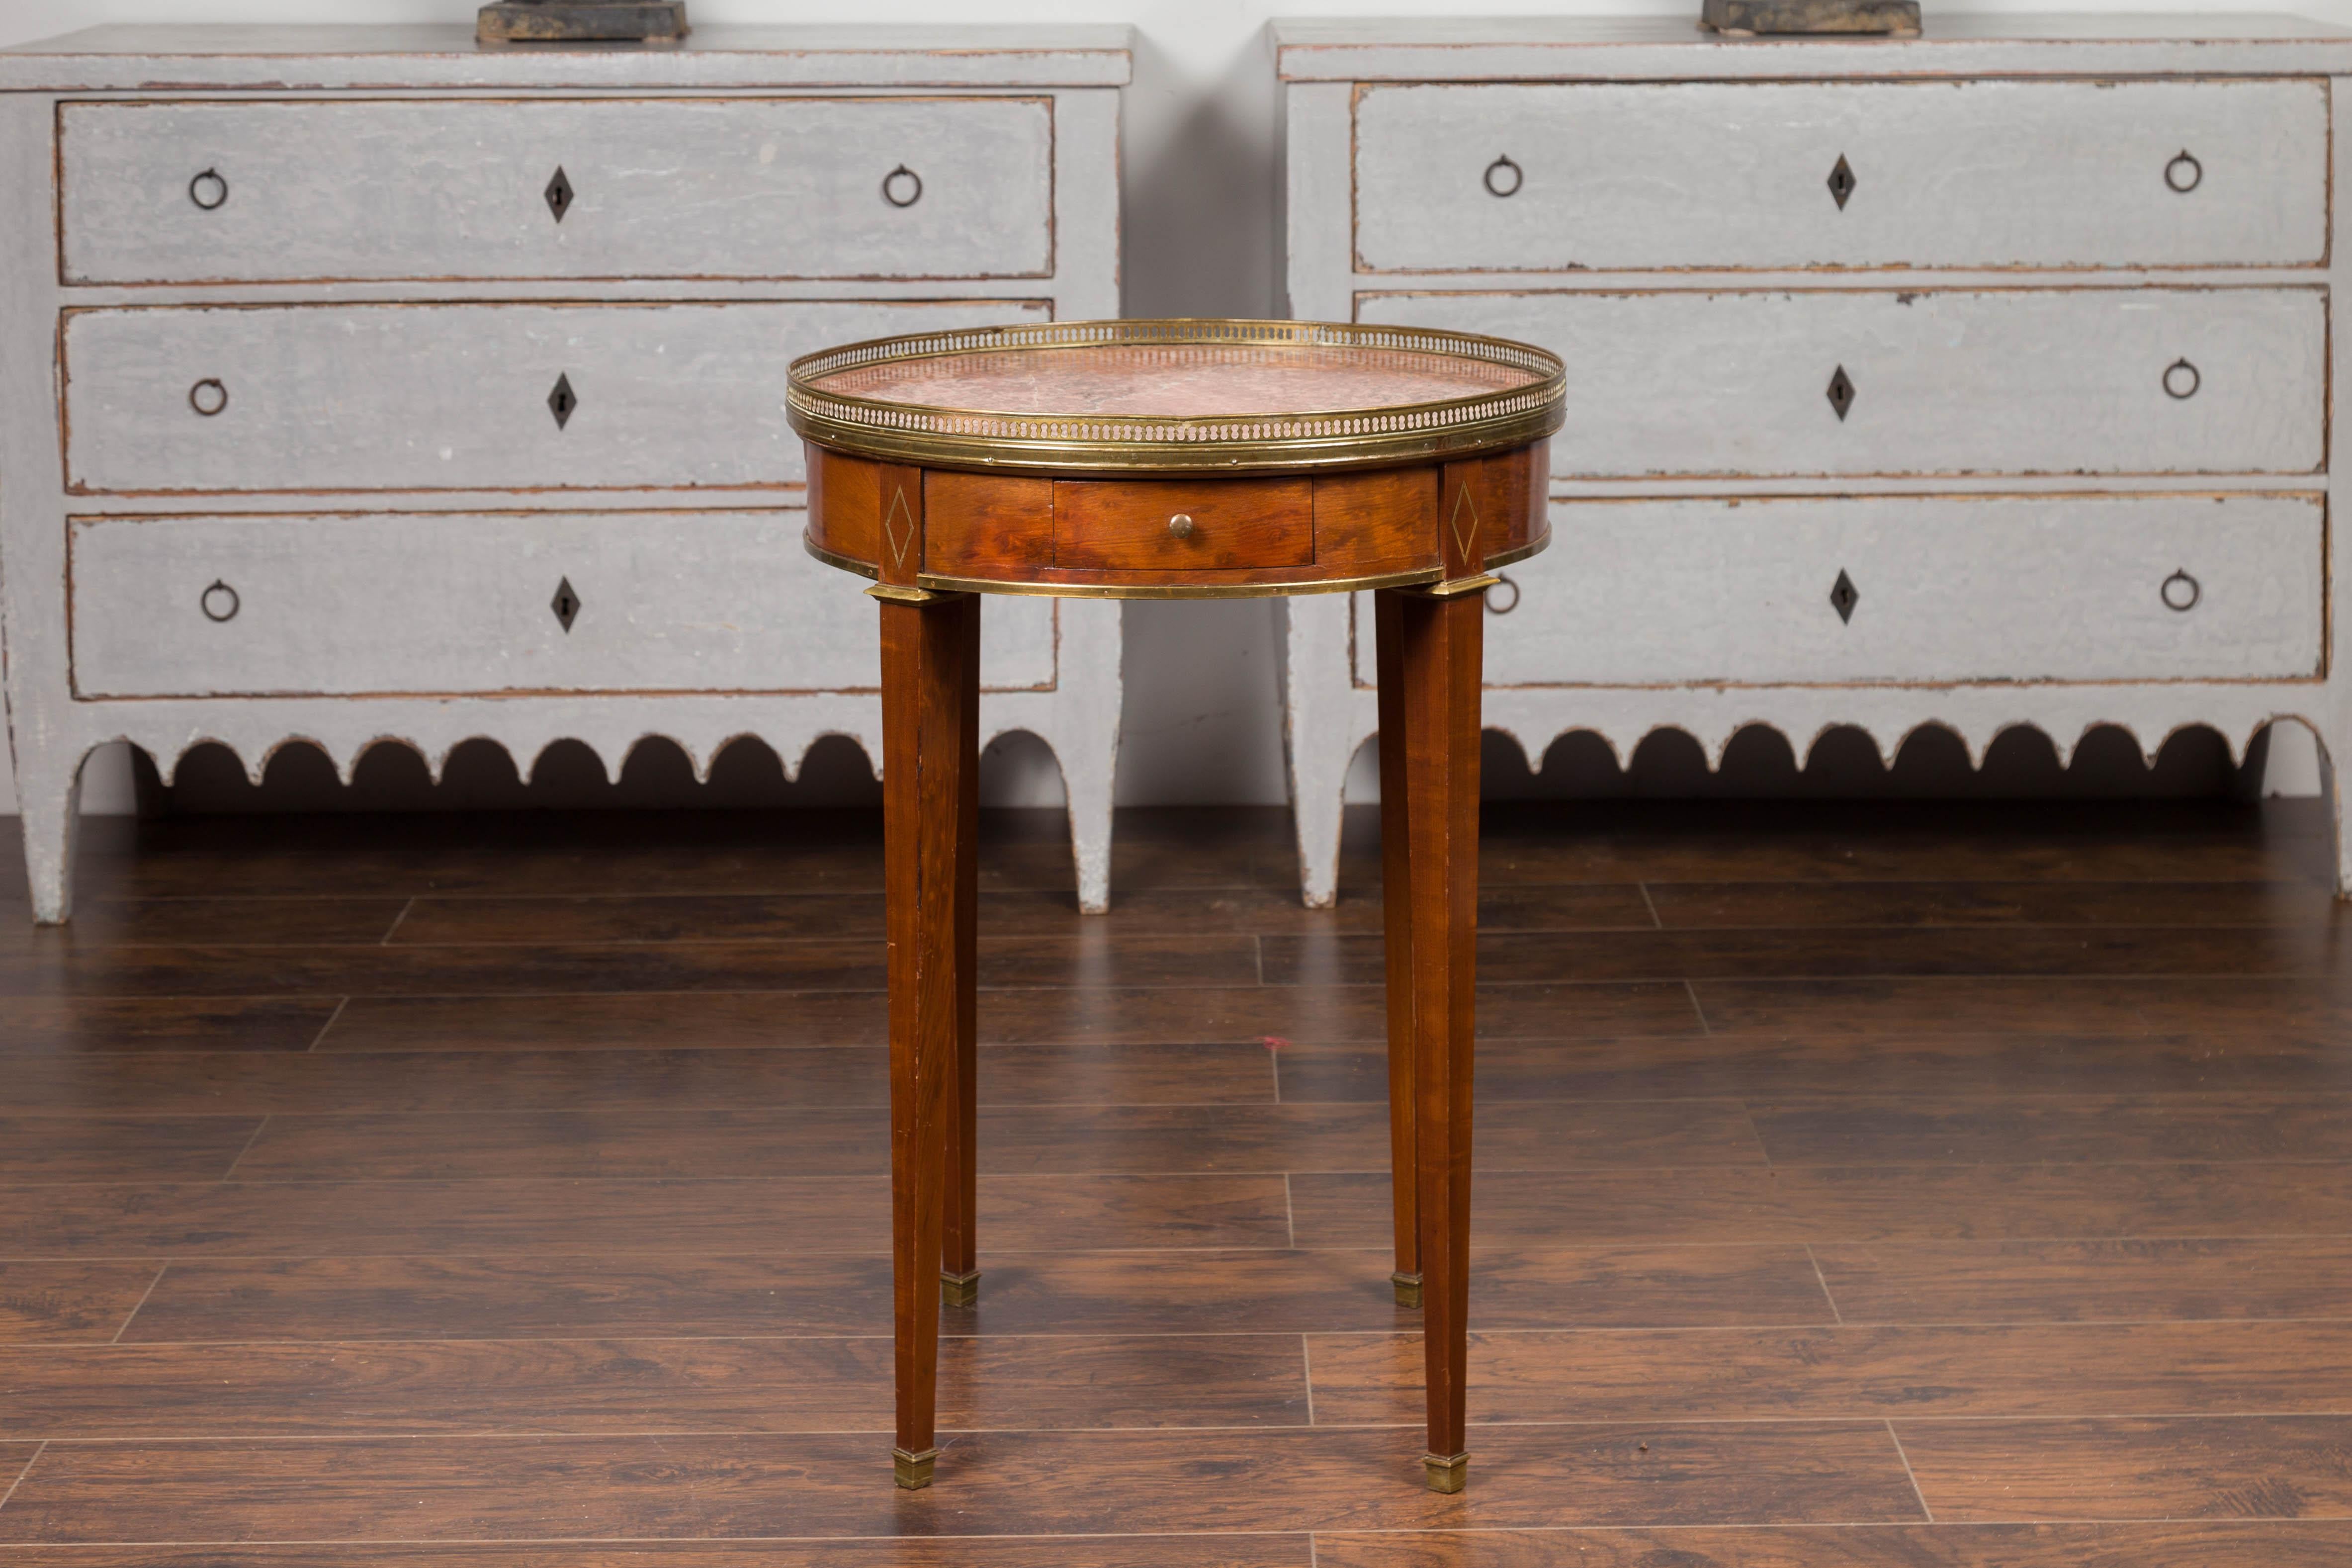 French 1870s Empire Style Round Table with Marble Top, Brass Gallery and Drawer For Sale 1